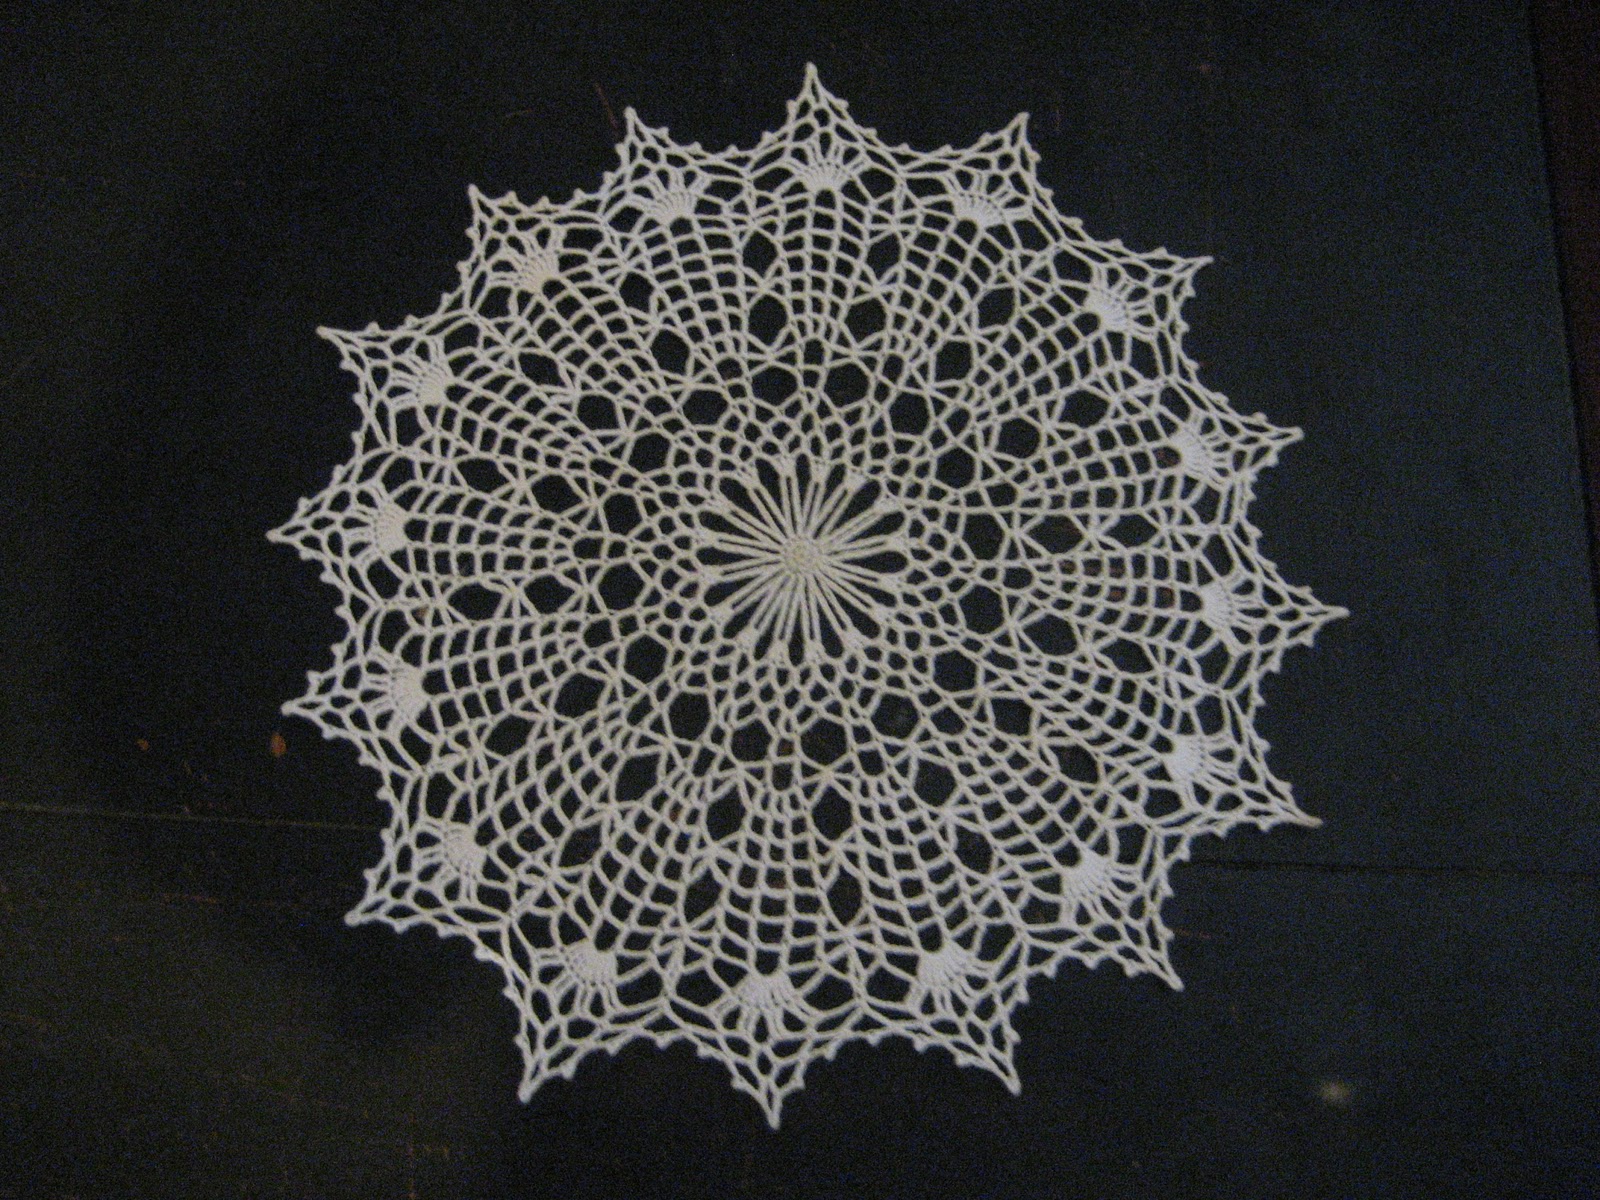 Crochet Every Day: September 23: Spider Web Doily #2 - COMPLETED